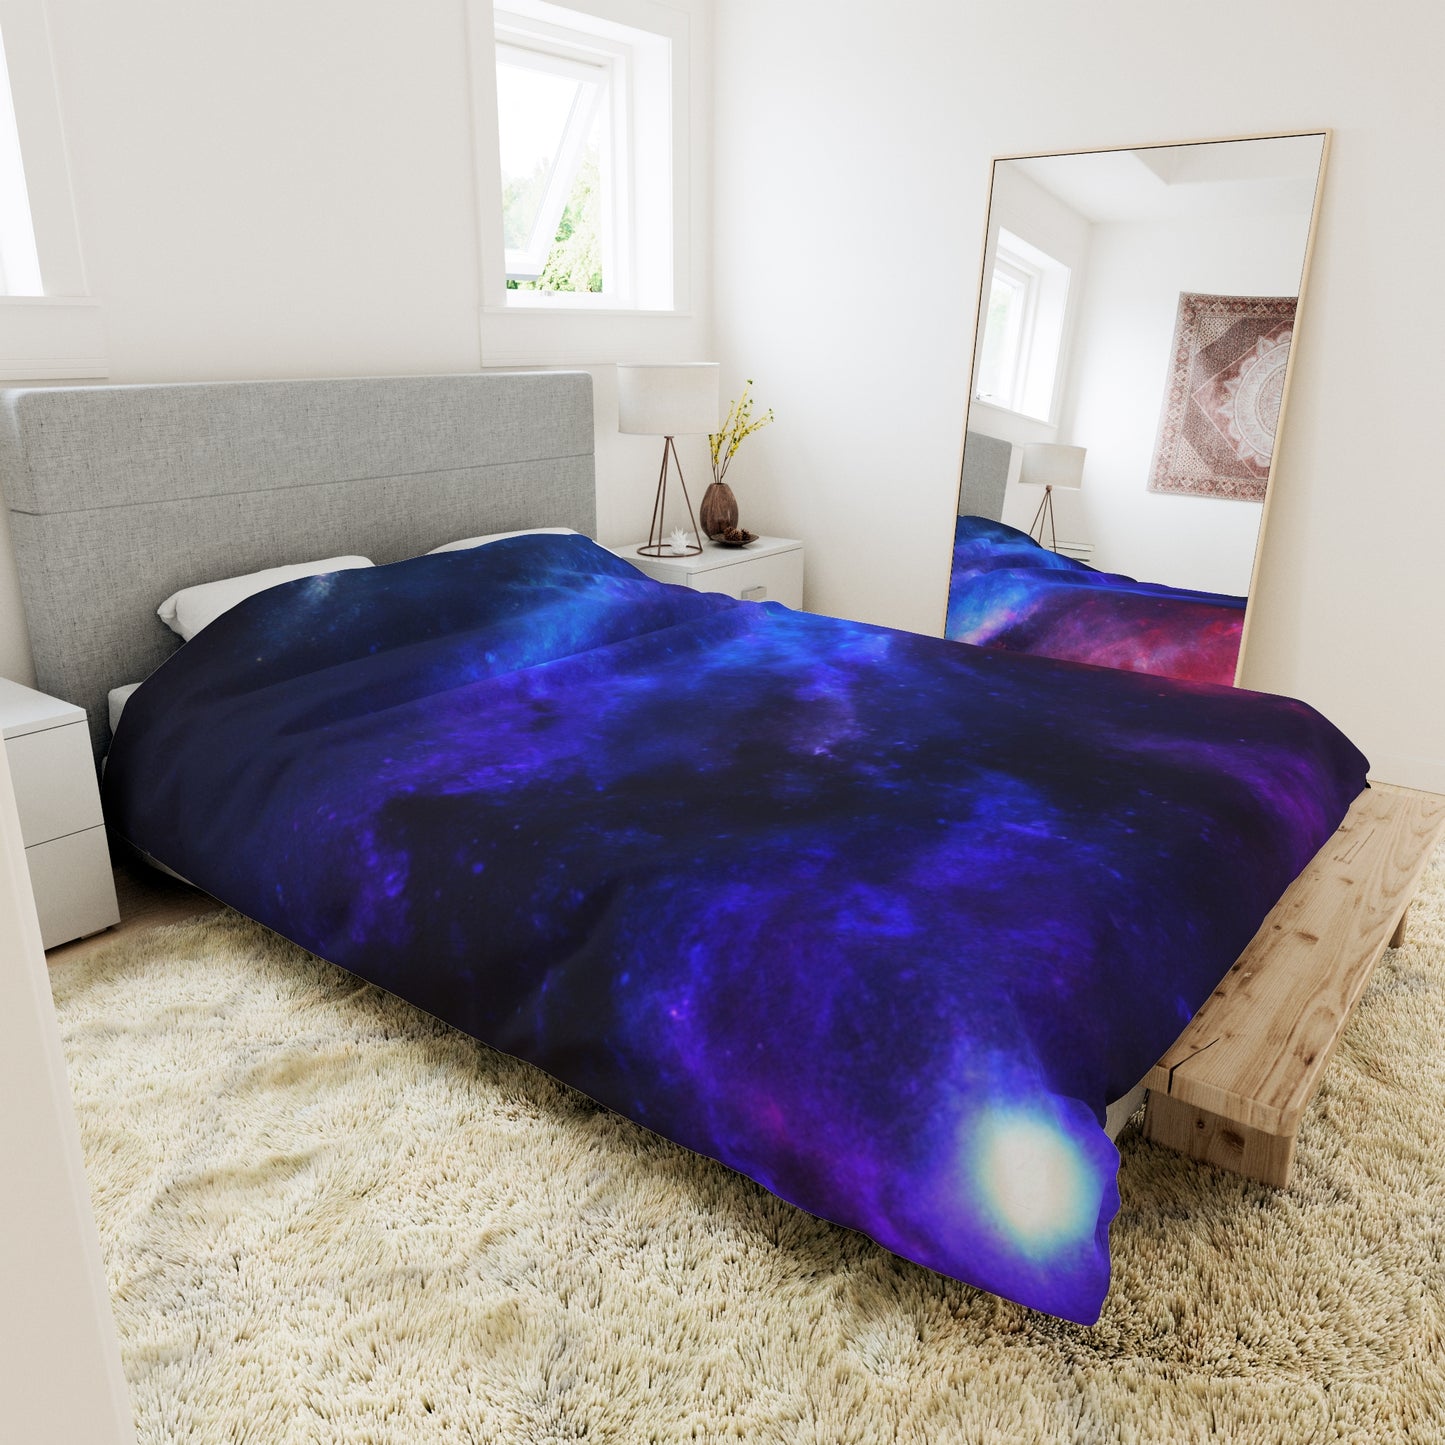 Dreamy Dolores - Astronomy Duvet Bed Cover